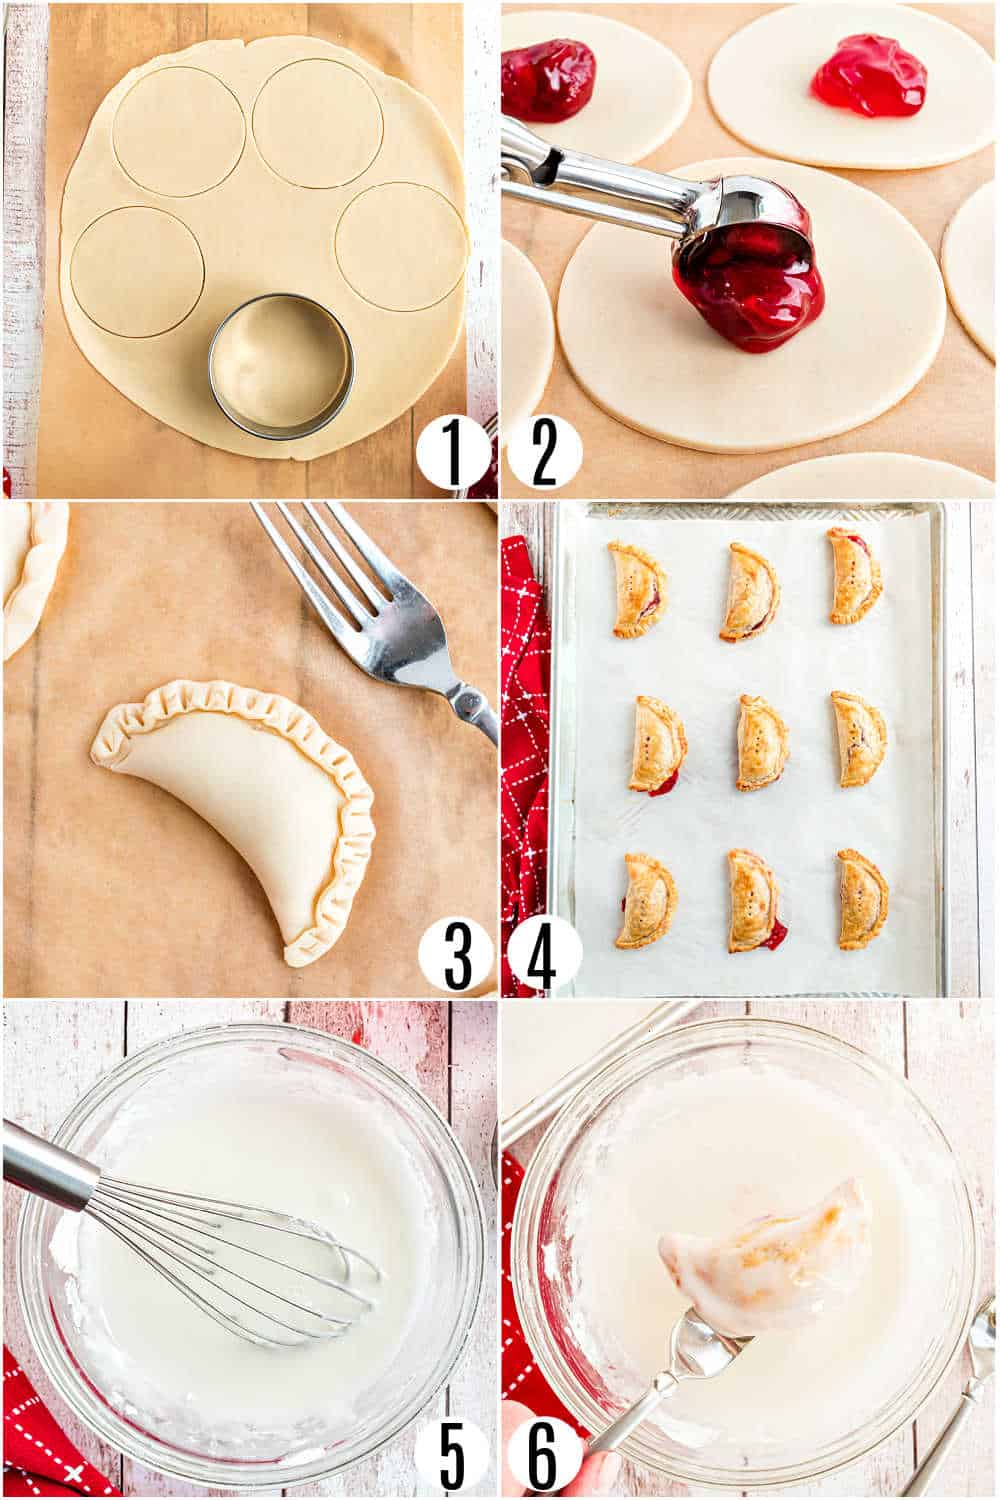 Step by step photos showing how to make strawberry hand pies.